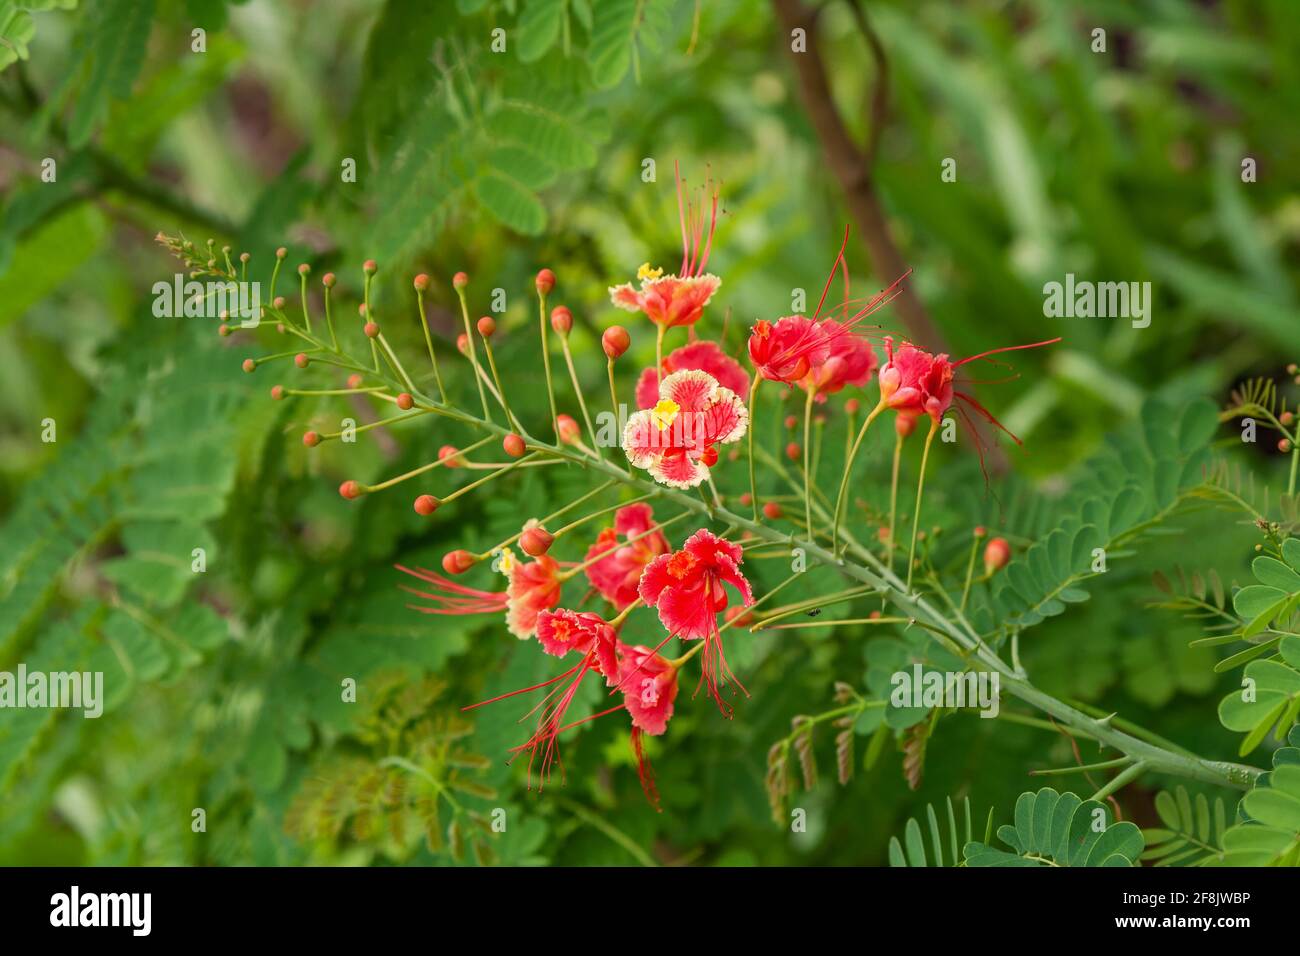 Racemose inflorescence of the bright red flowers of the tropical plant Caesalpinia pulcherrima Stock Photo